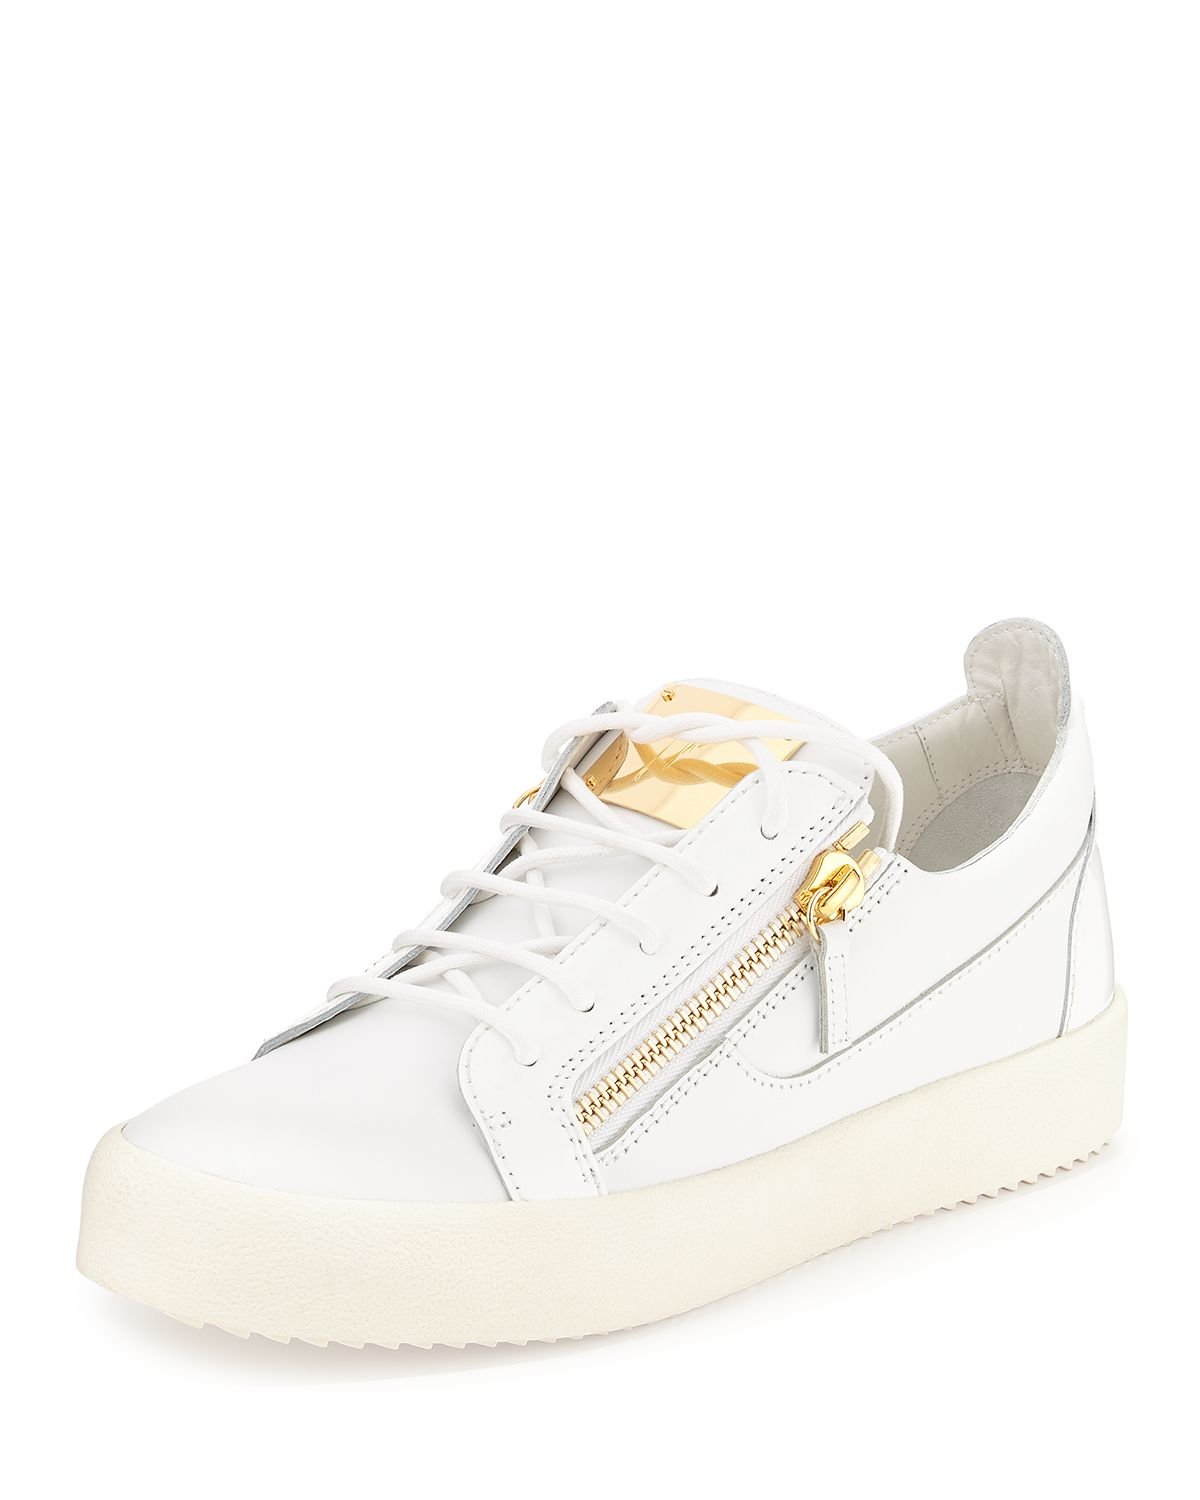 Lyst - Giuseppe Zanotti Patent Leather Low-Top Sneakers in White for Men